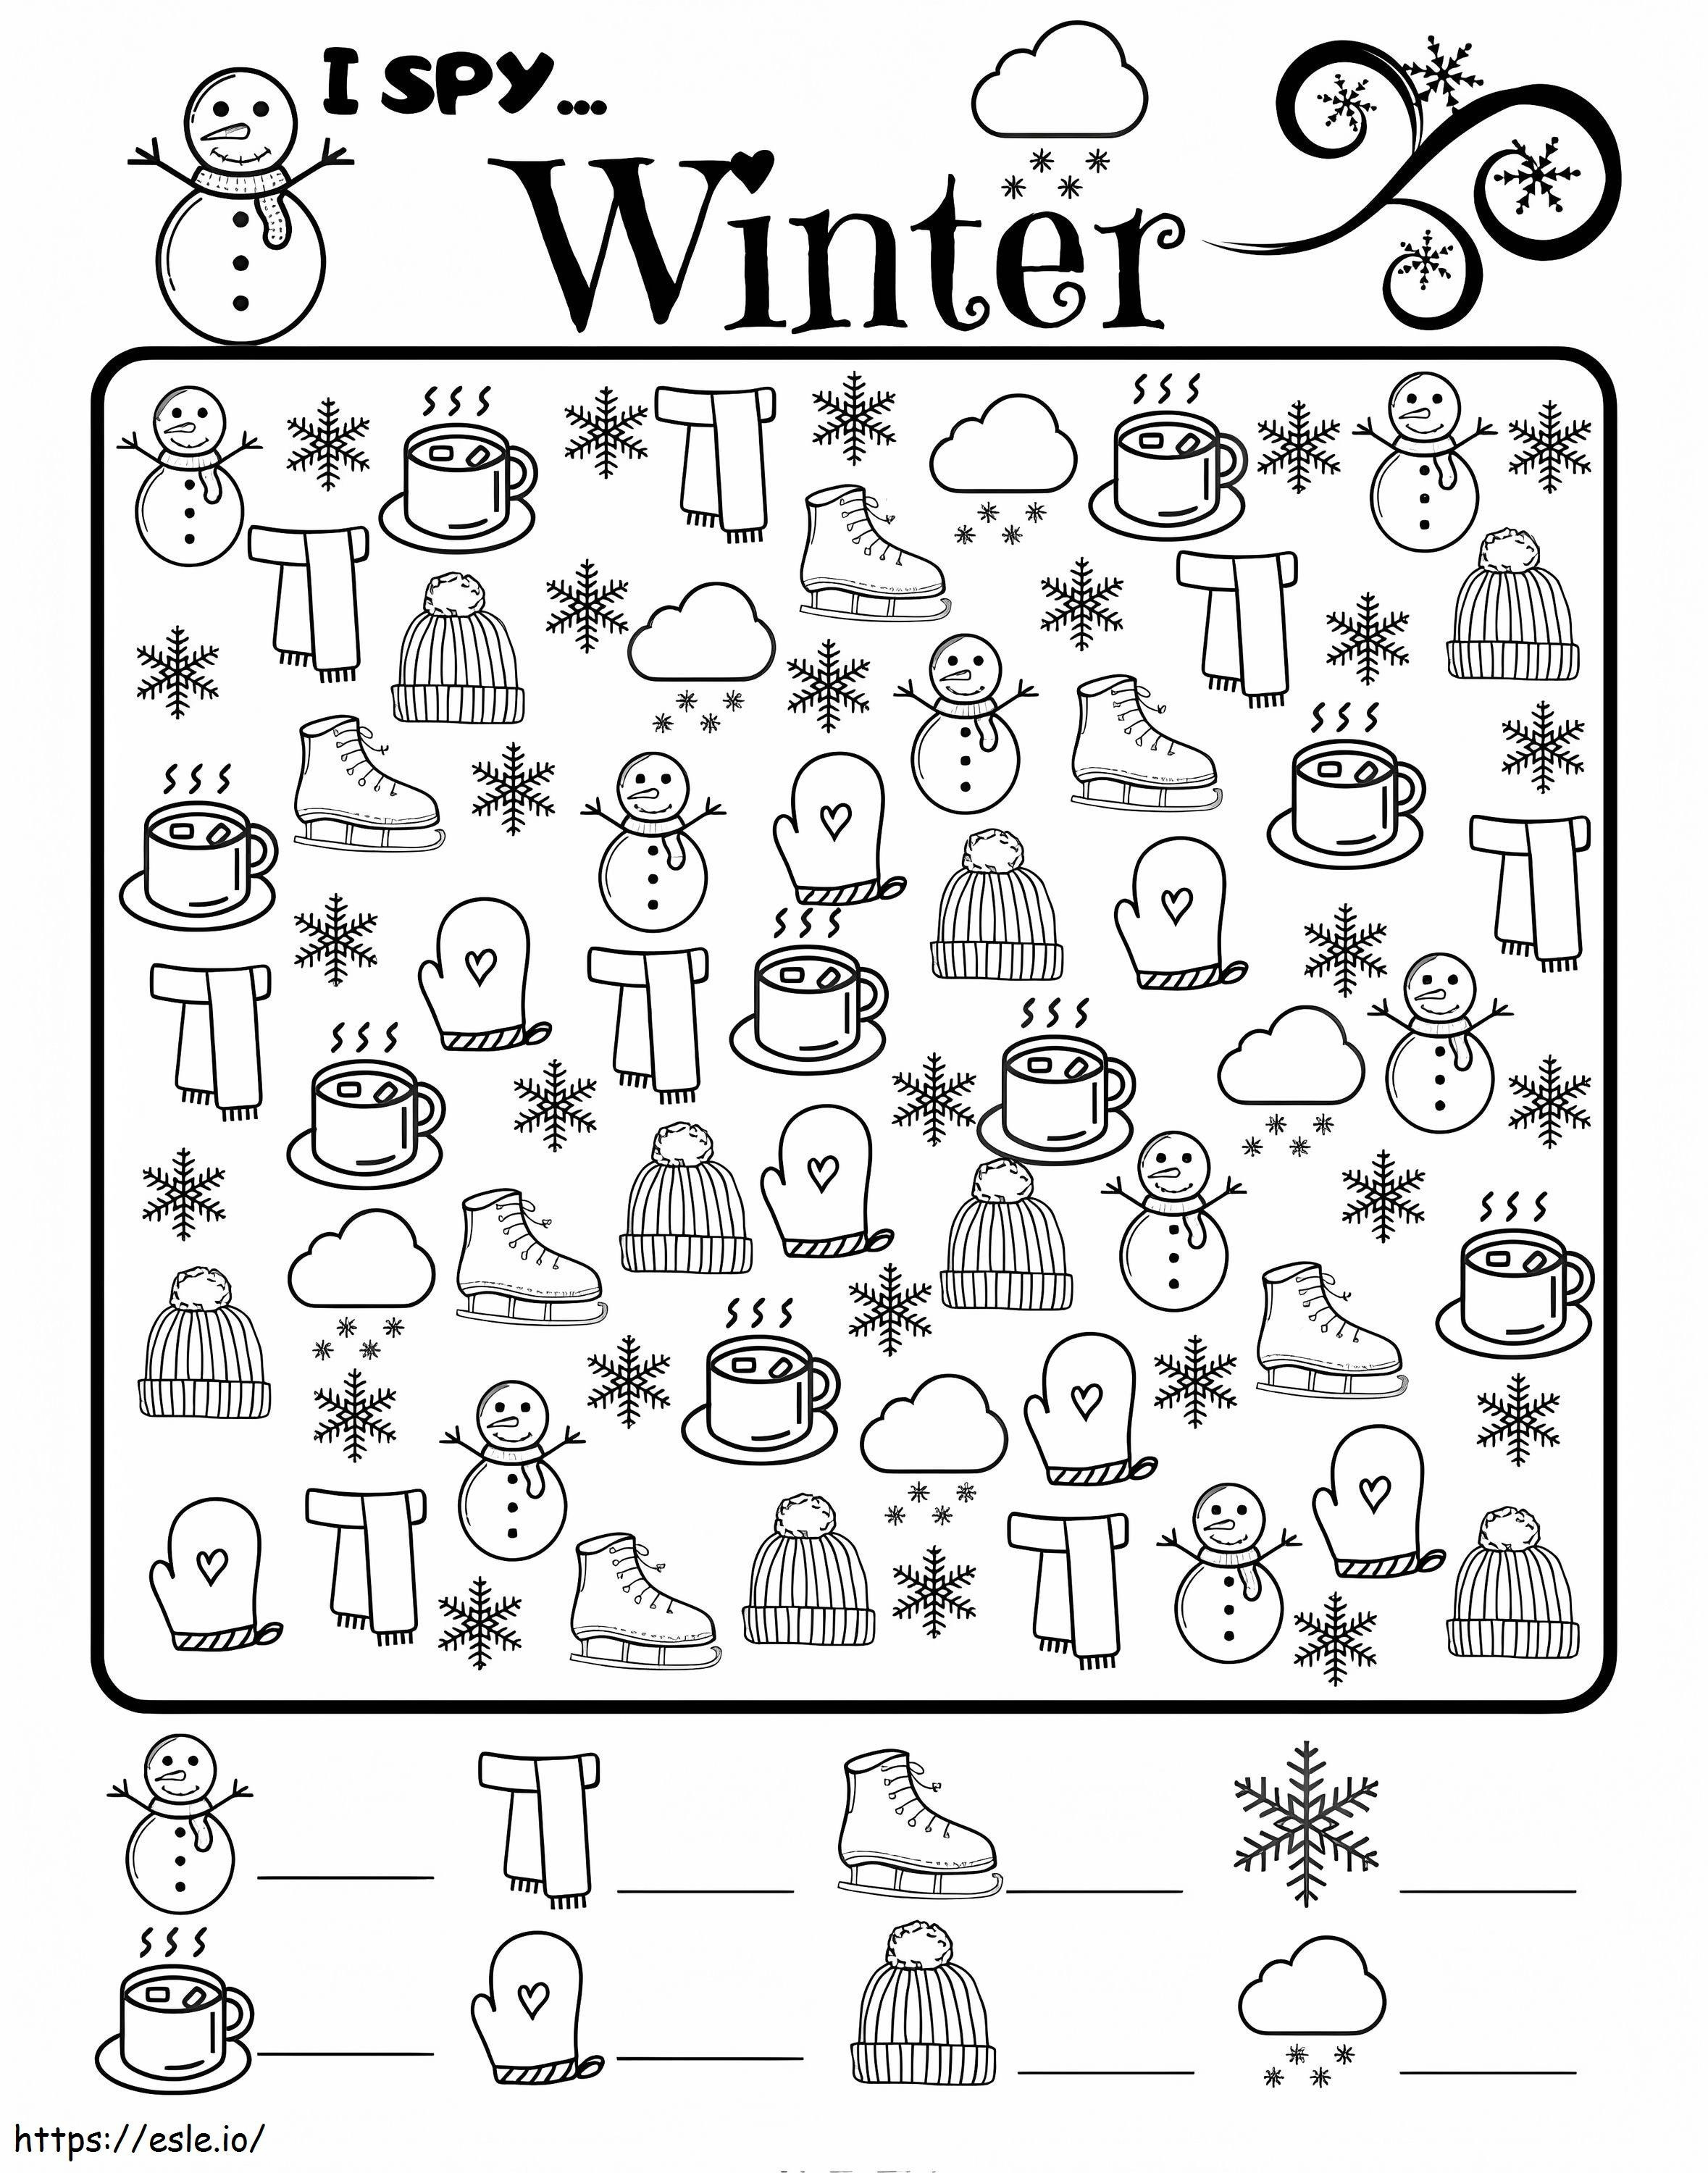 I Spy Winter coloring page